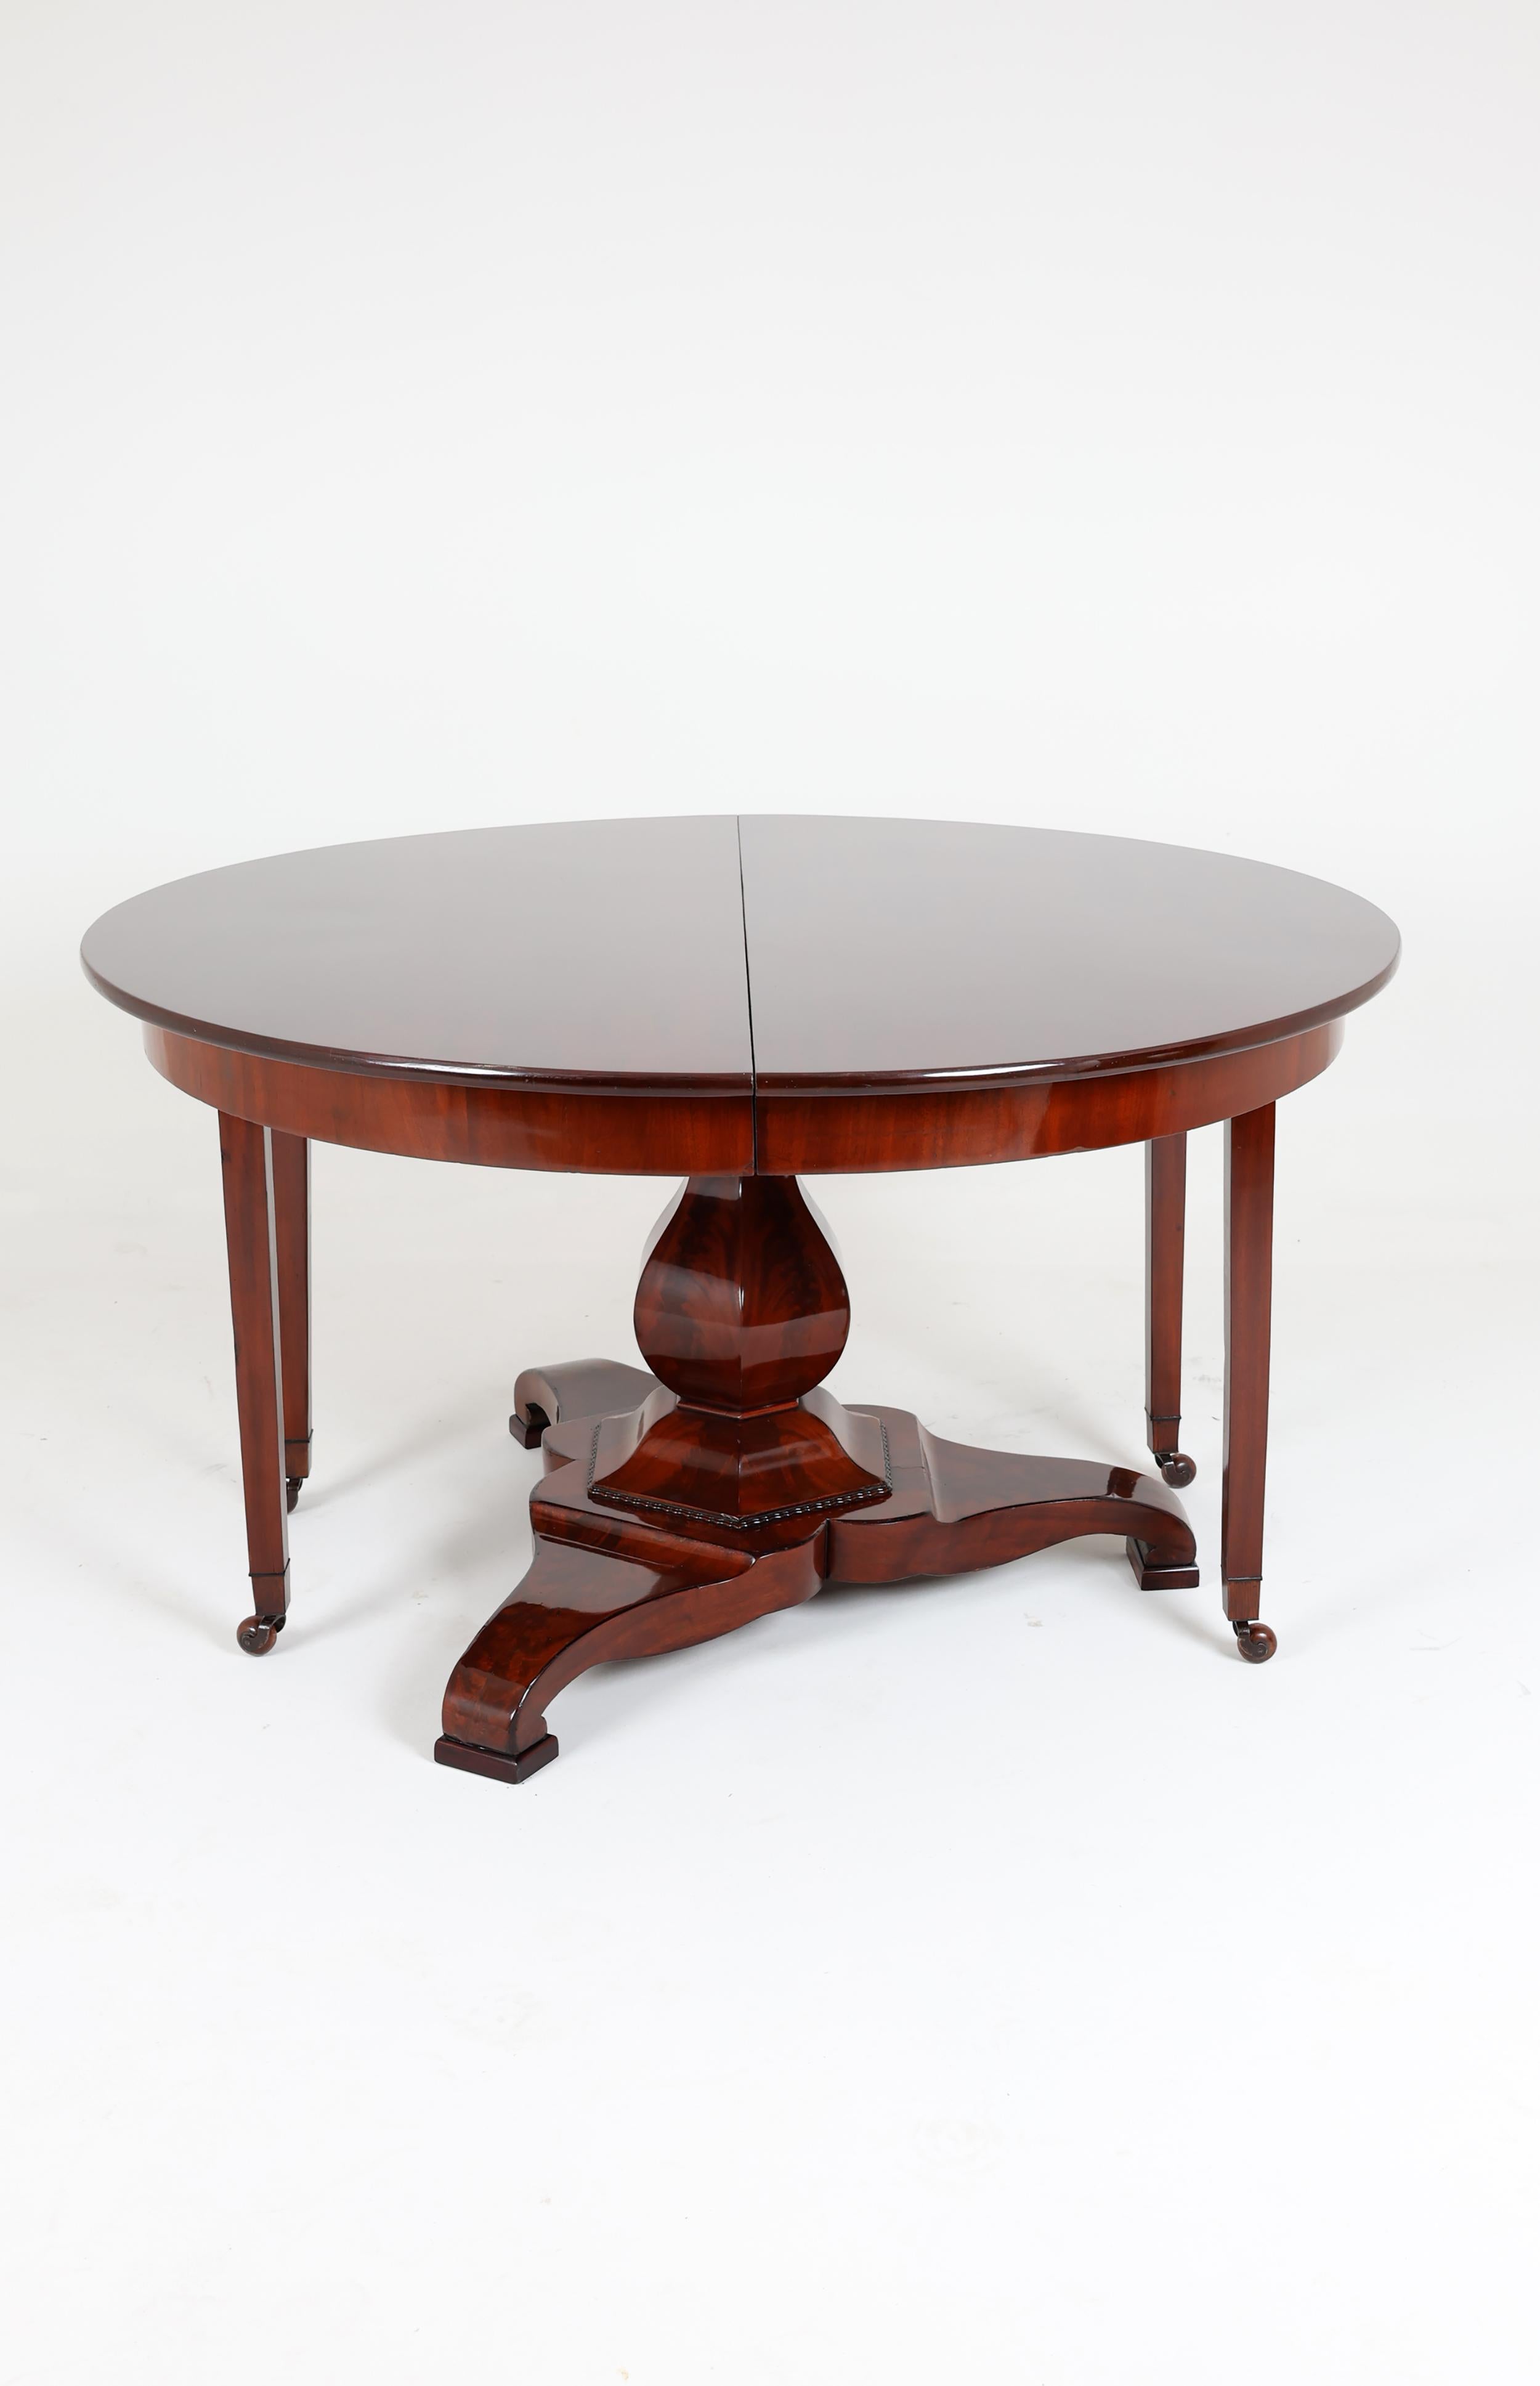 Biedermeier 19th Century Mahogany Dining Room Table, 177 inches Long For Sale